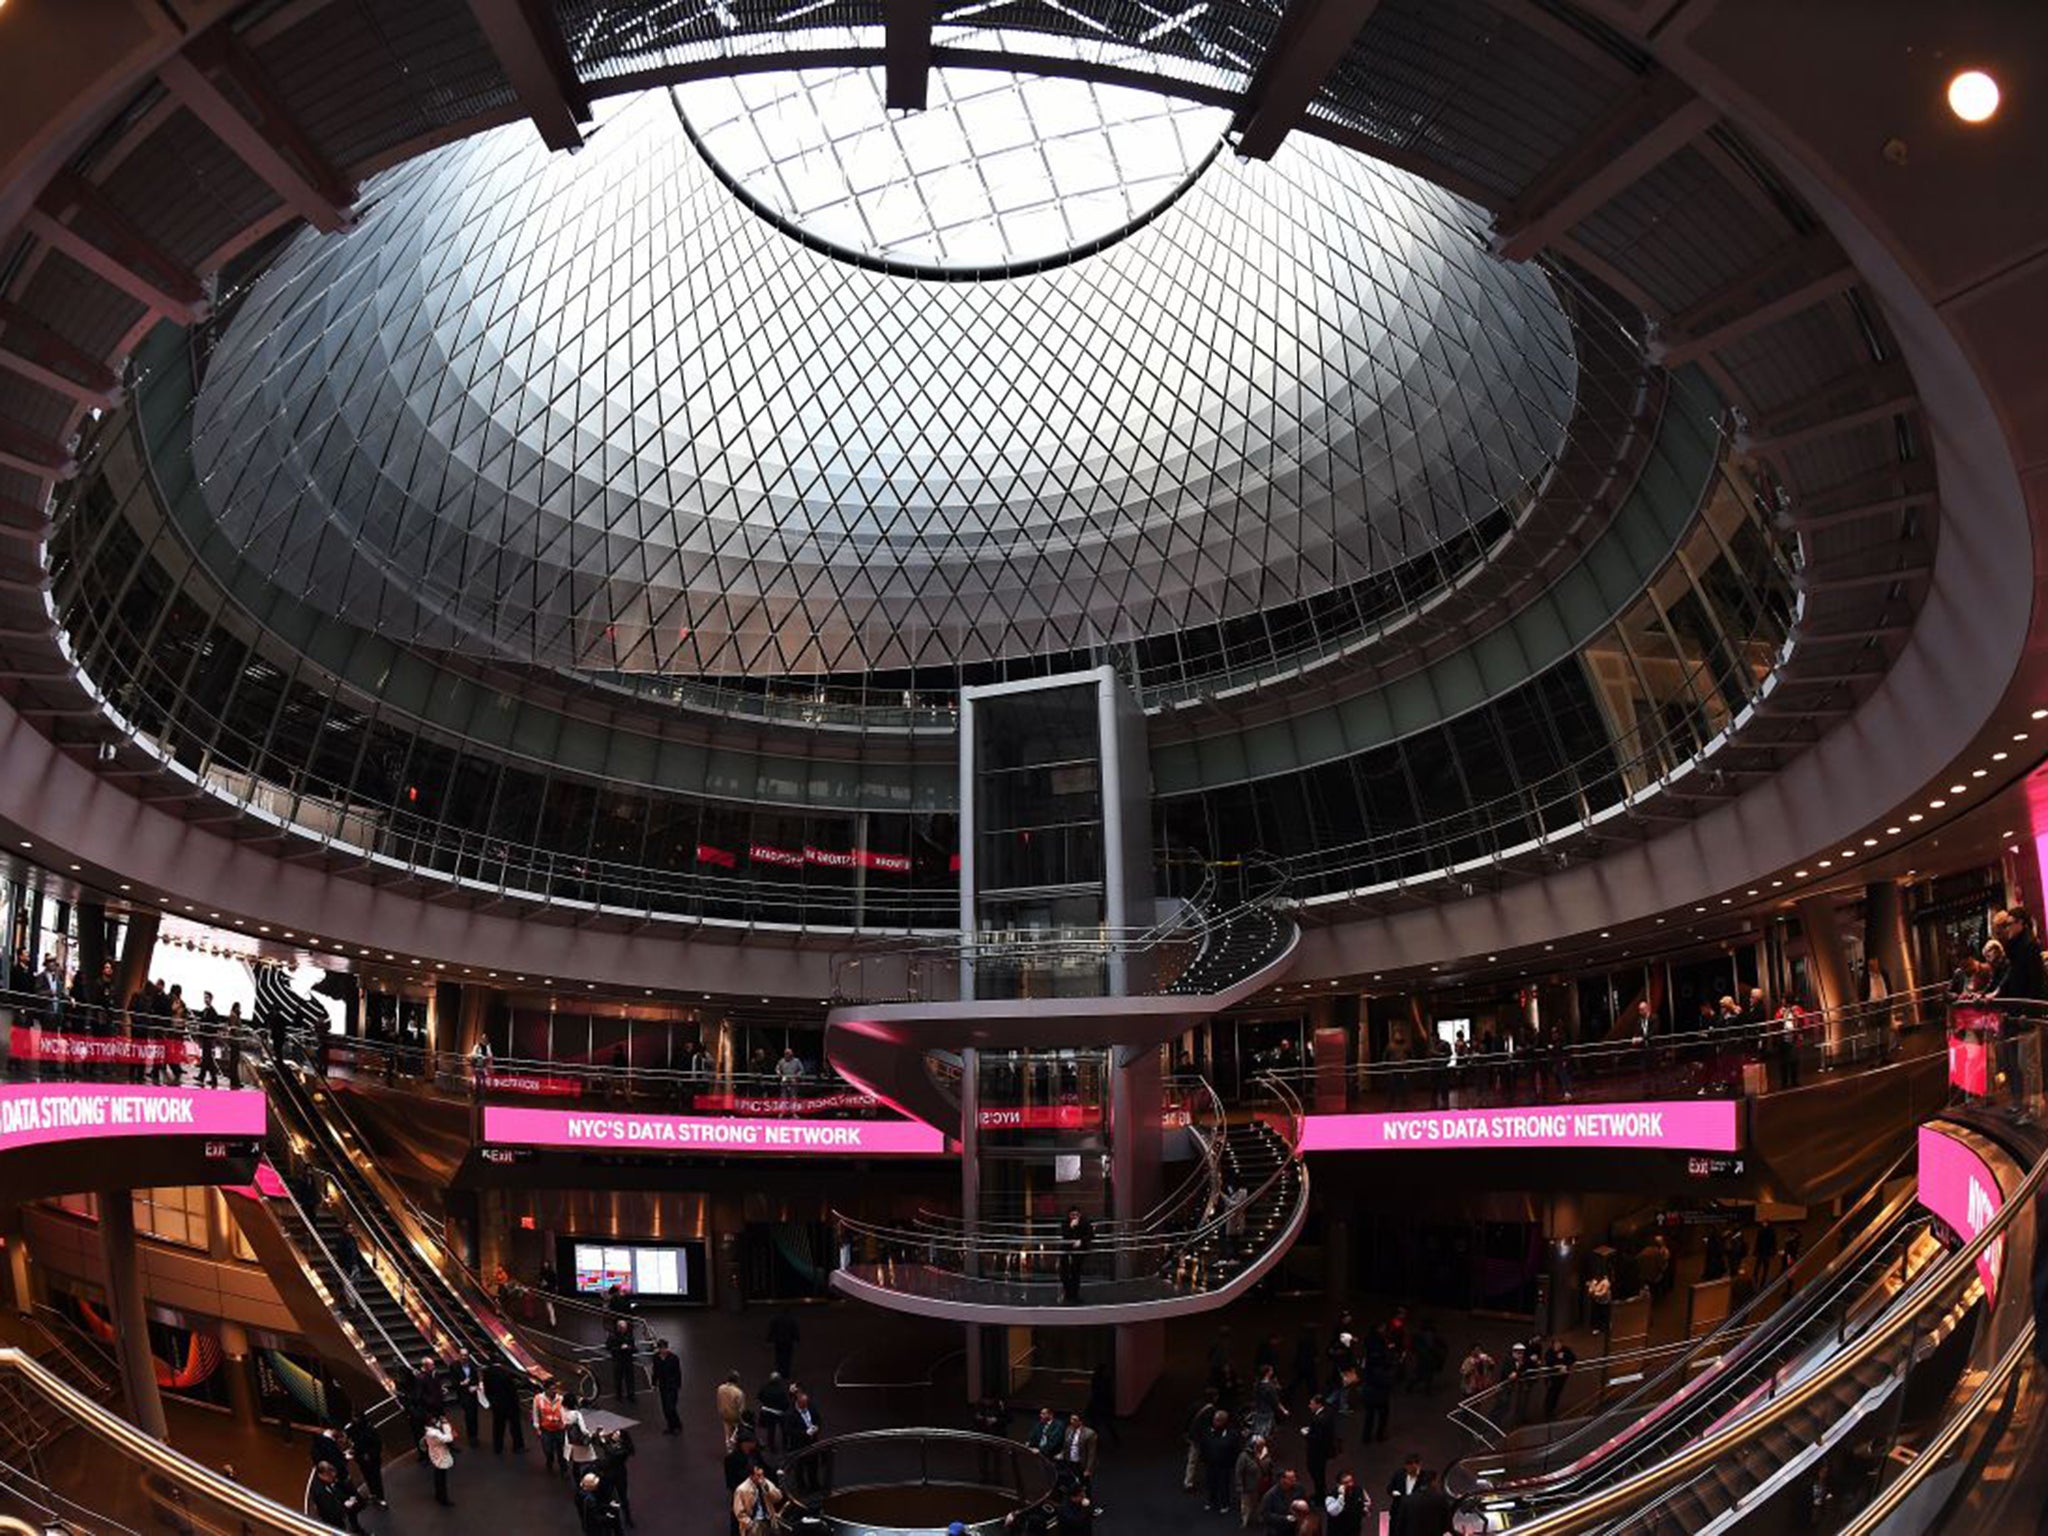 The ‘Sky-Reflector Net’, built into the Fulton Centre’s dome, funnels light below ground